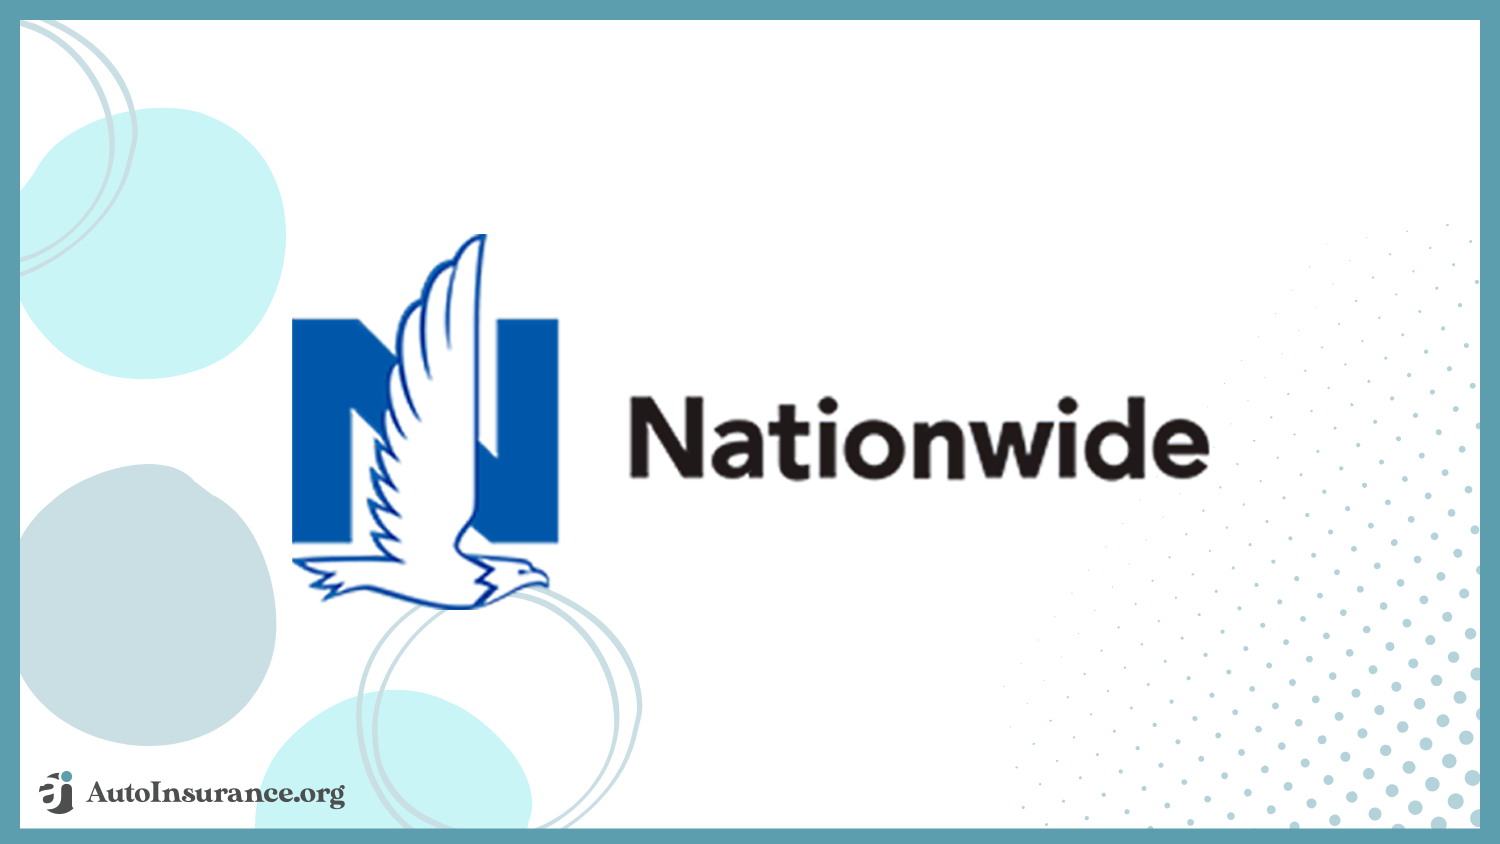 Nationwide: Best Auto Insurance for International Drivers